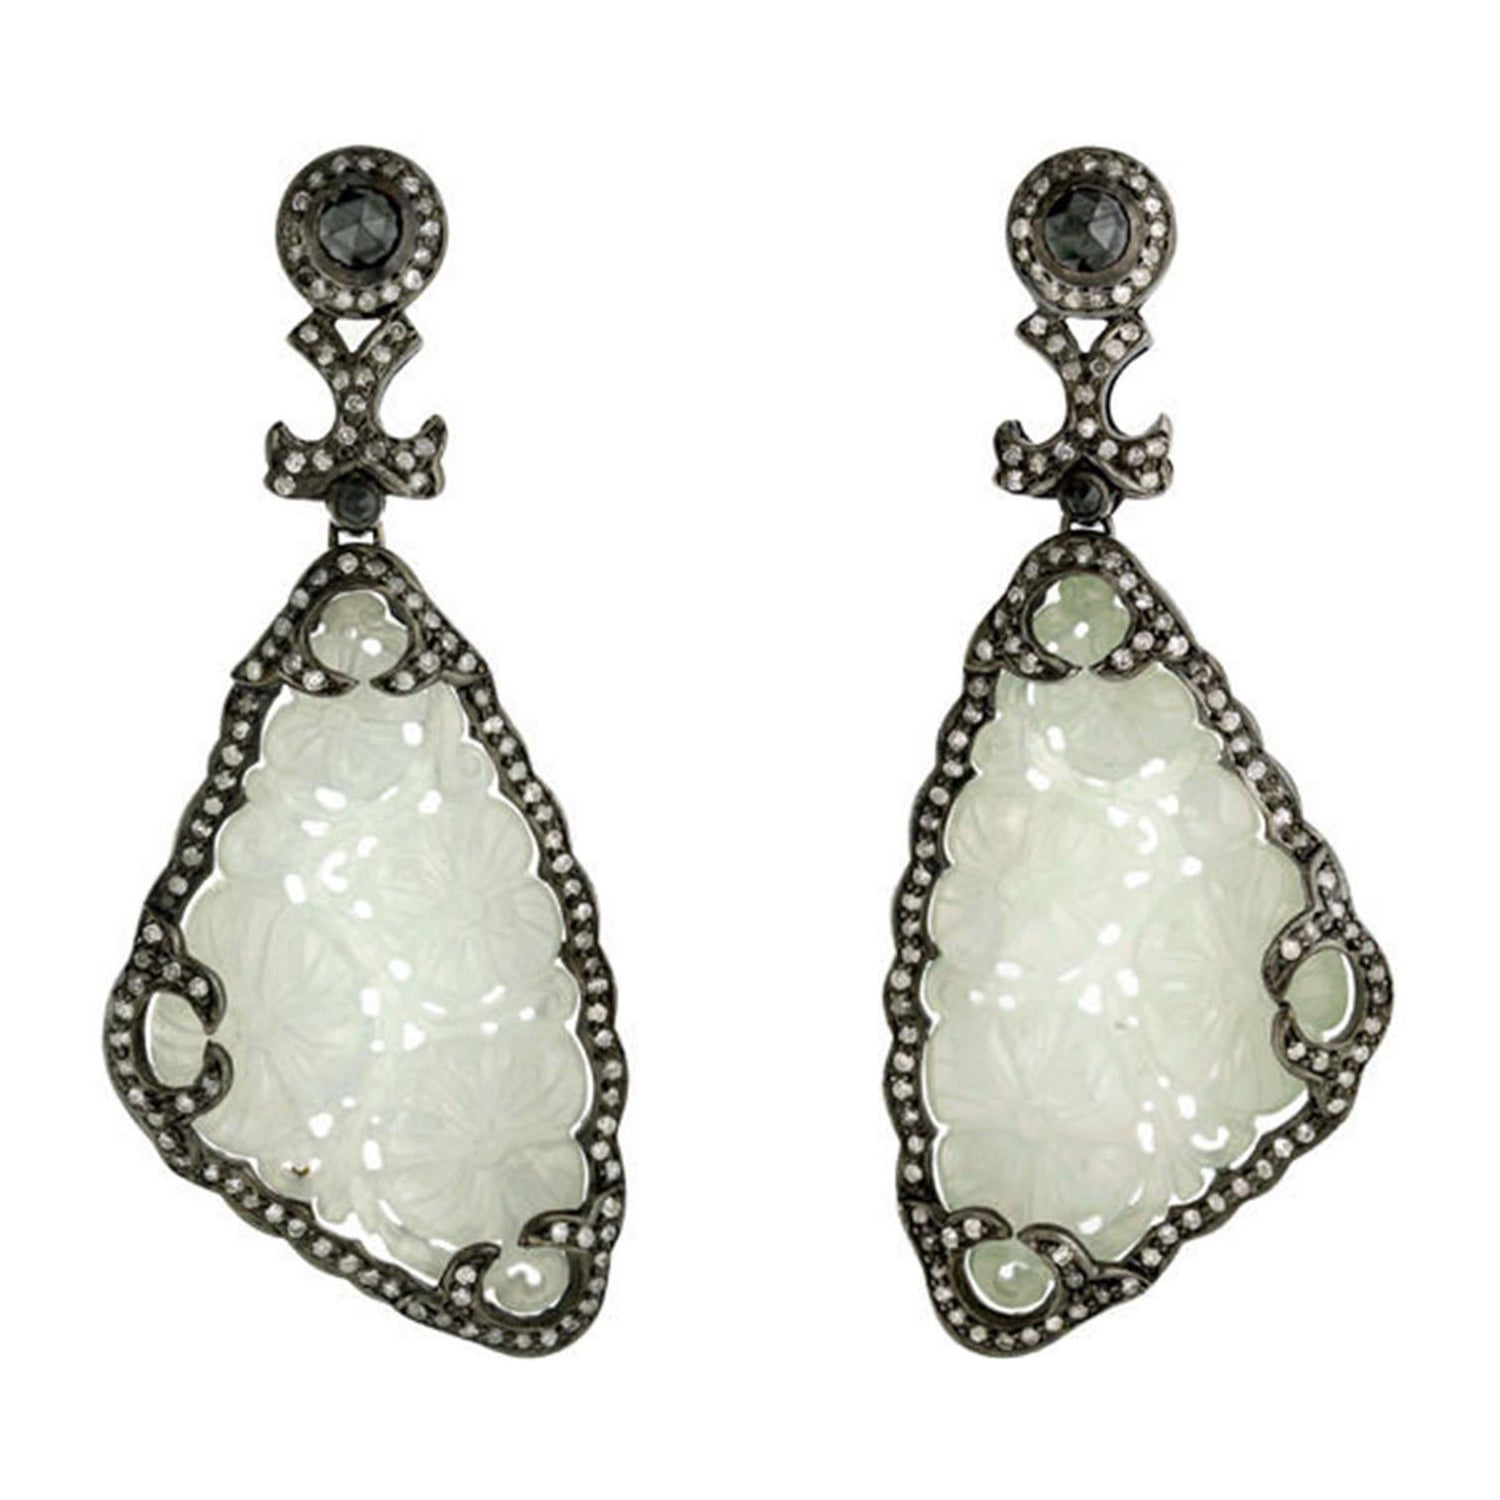 Carved Jade Earring Surrounded by Pave Diamonds Made in 18k Yellow Gold & Silver